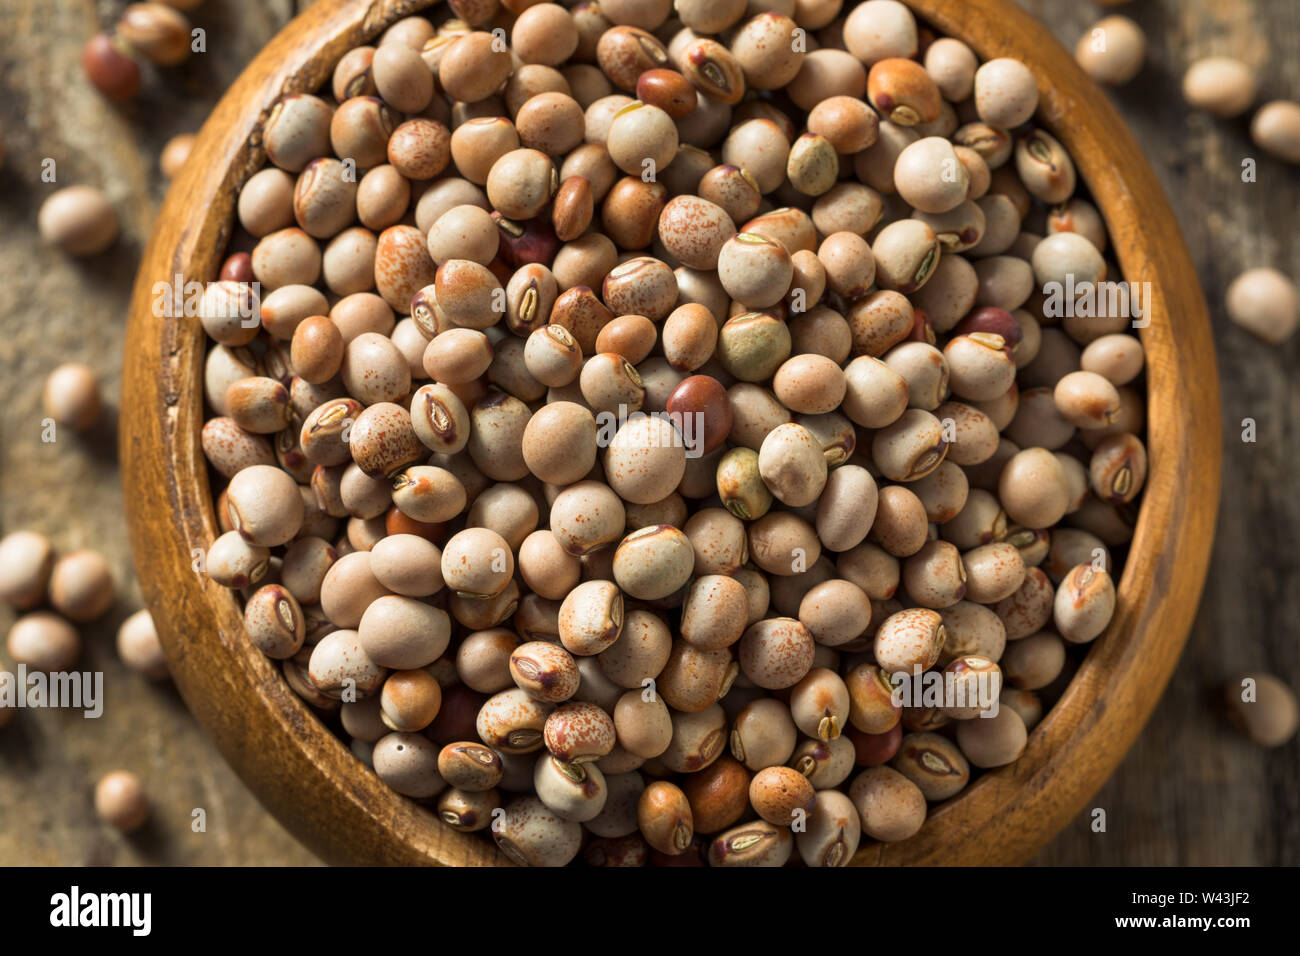 Organic Dry Toor Whole Pigeon Peas in a Bowl Stock Photo